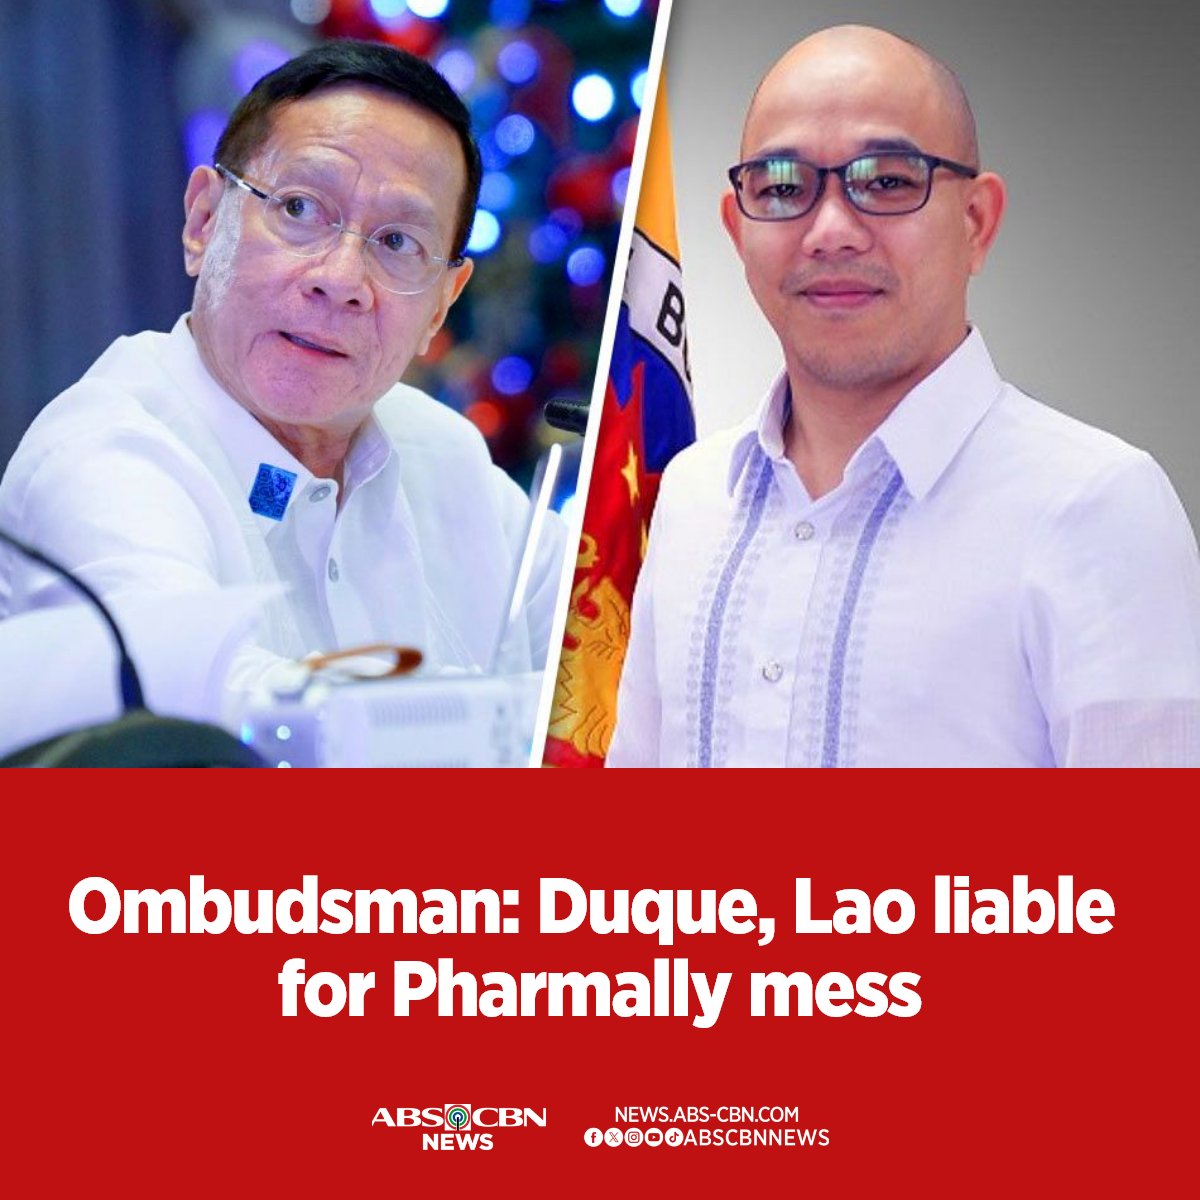 The graft charges recommended by the Ombudsman against former Health Secretary Francisco Duque III and Lloyd Christopher Lao stemmed from the controversial procurement of pandemic medical supplies and equipment, through the DOH, in 2020.

FULL REPORT: abscbn.news/3UsPSBa